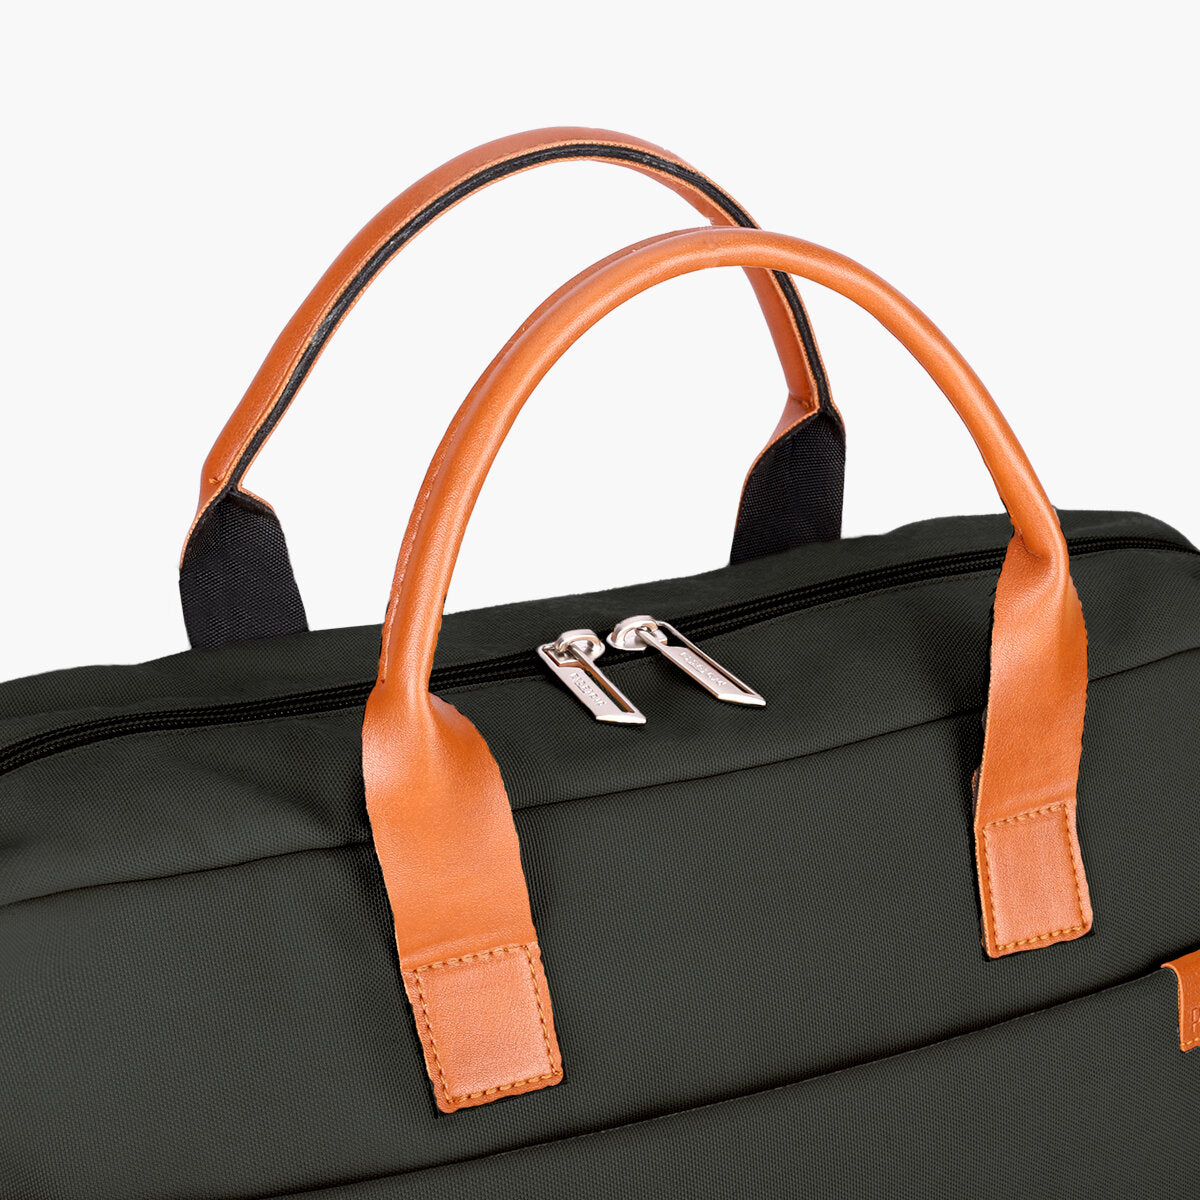 Olive | Protecta The Strong Buzz Office Laptop Bag - 7